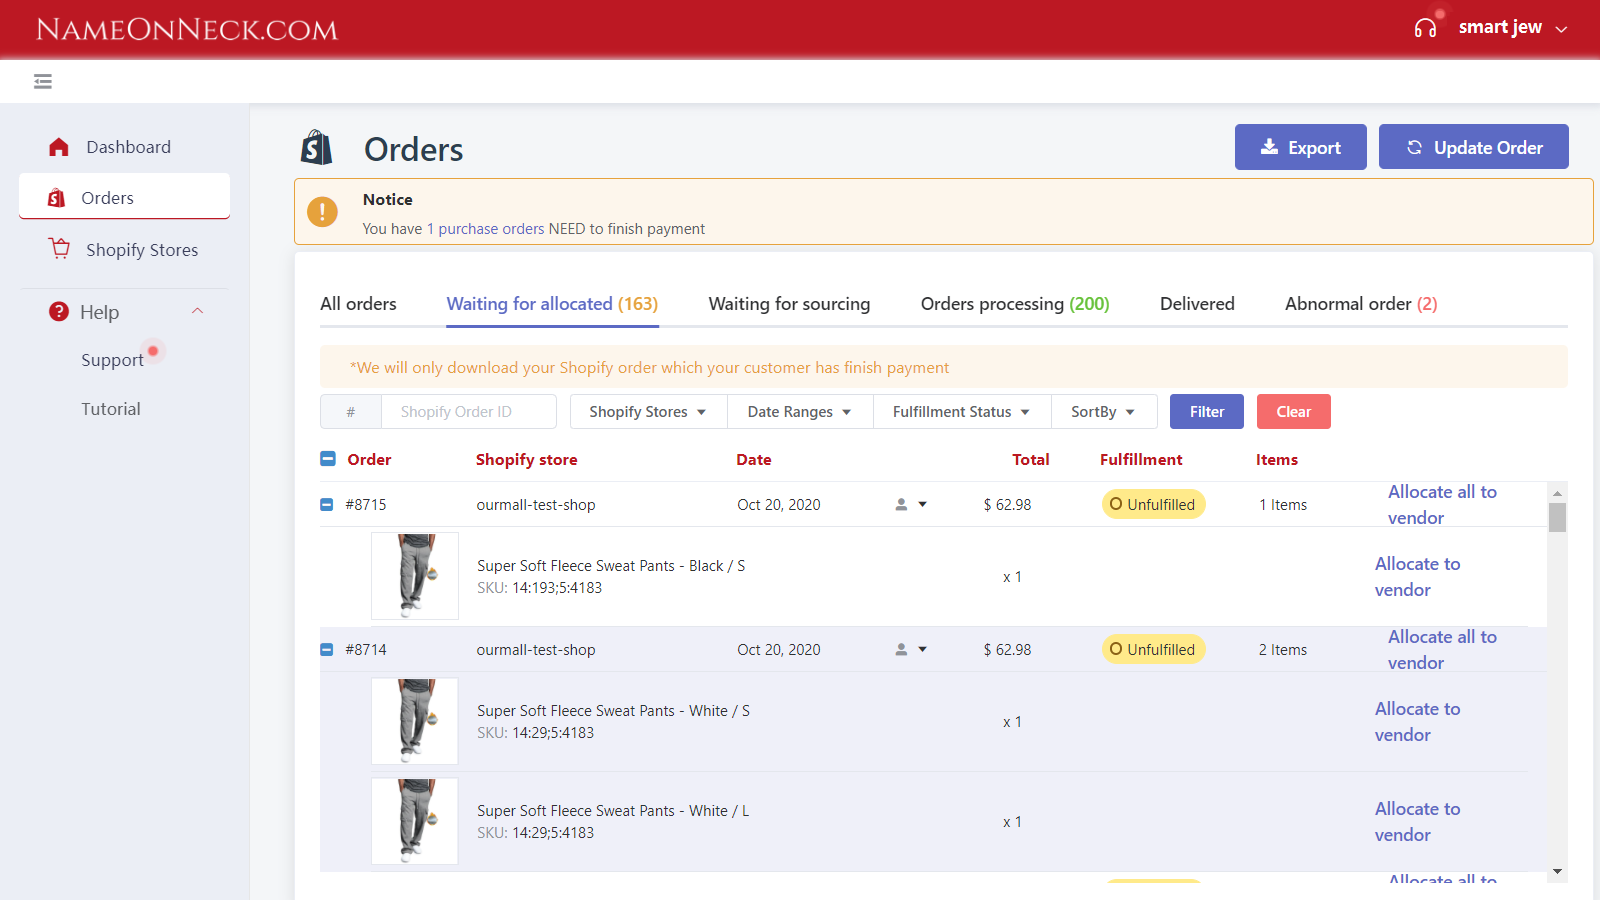 Allocate your Shopify orders to your vendors